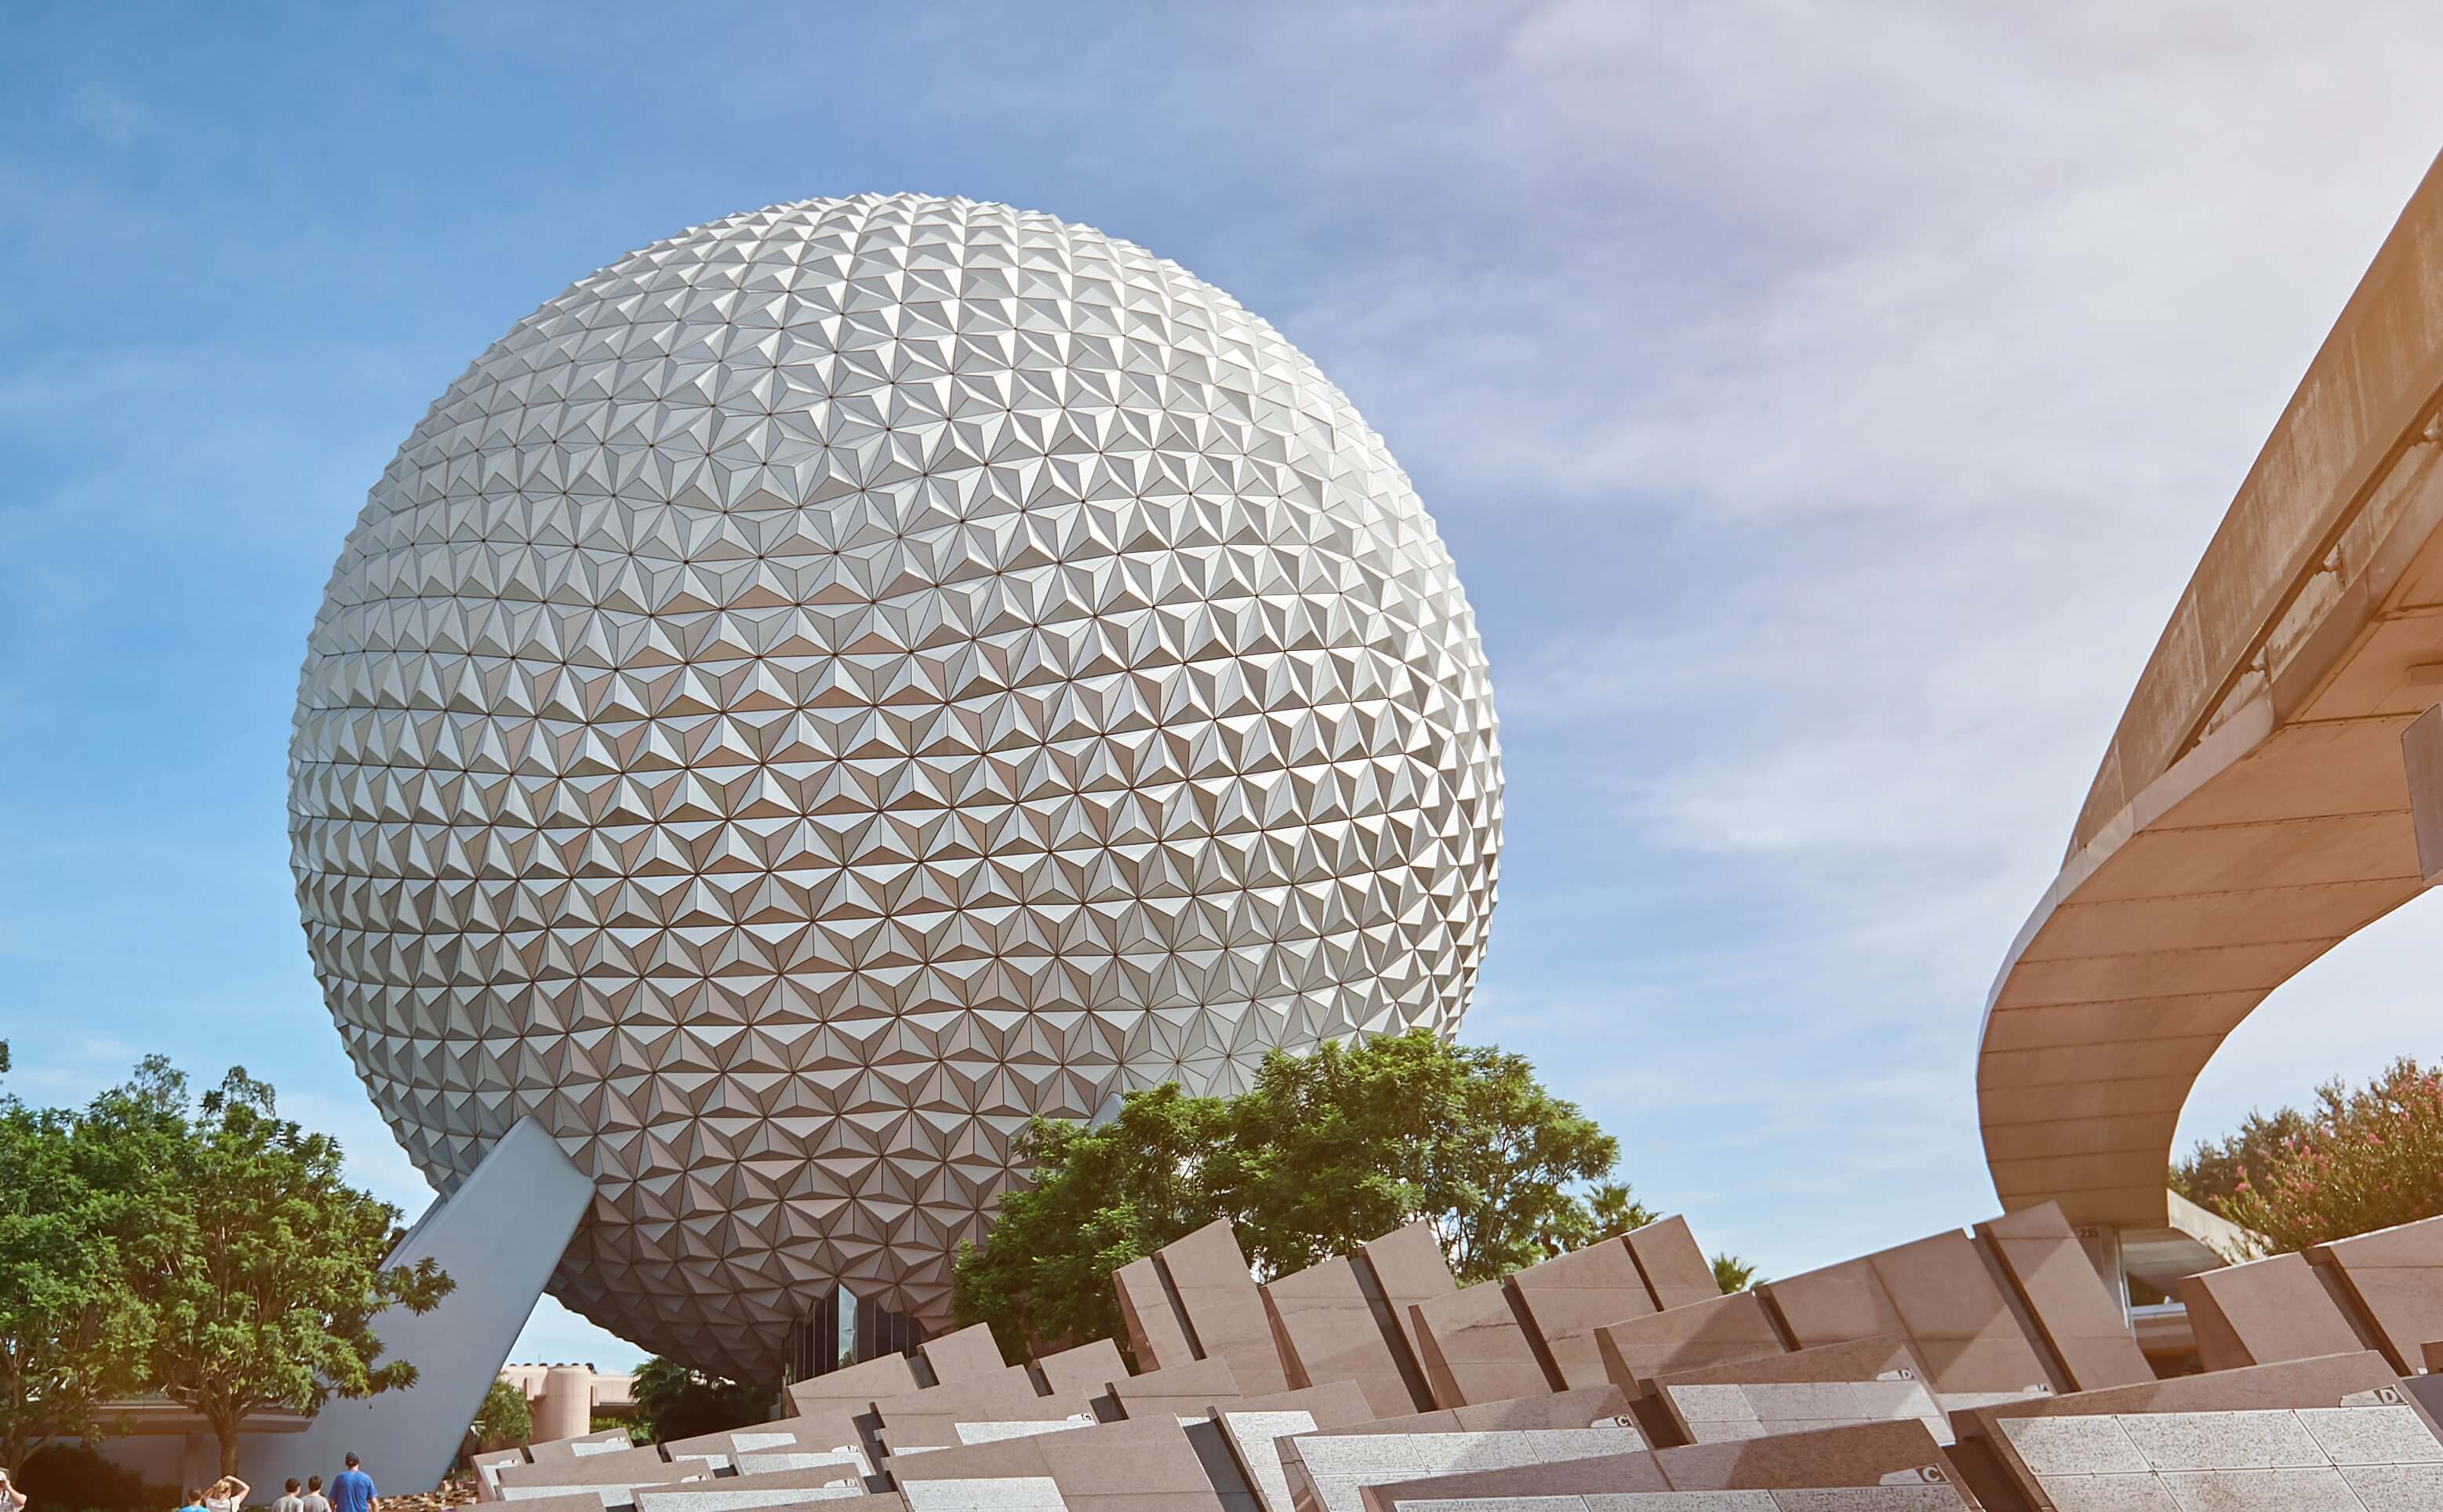 Spaceship Earth at Epcot in Disney World